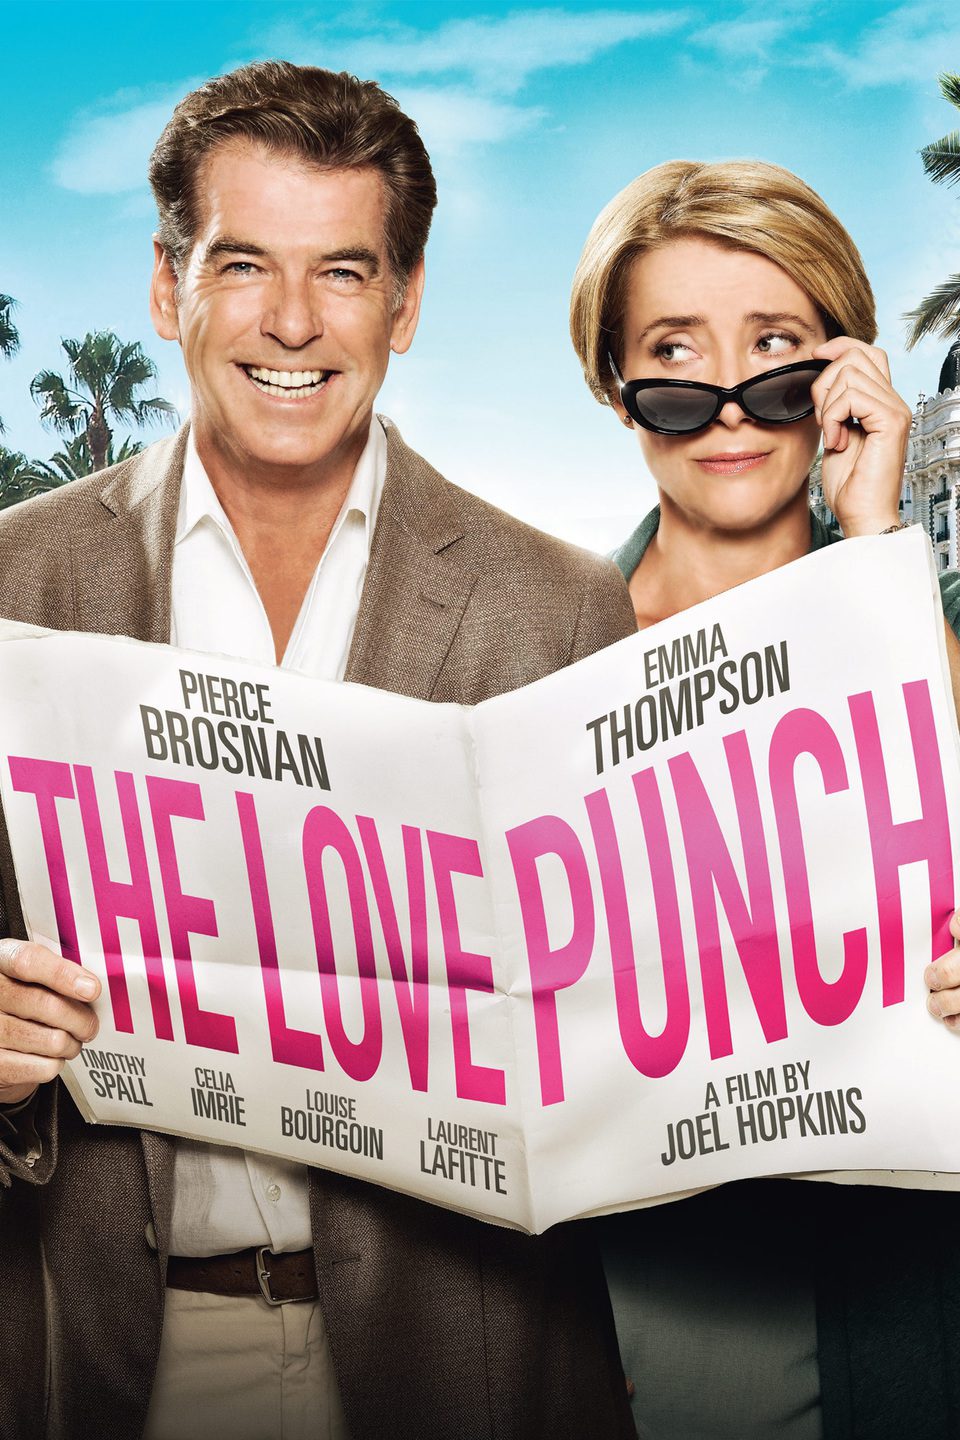 Poster of Love Punch - EEUU